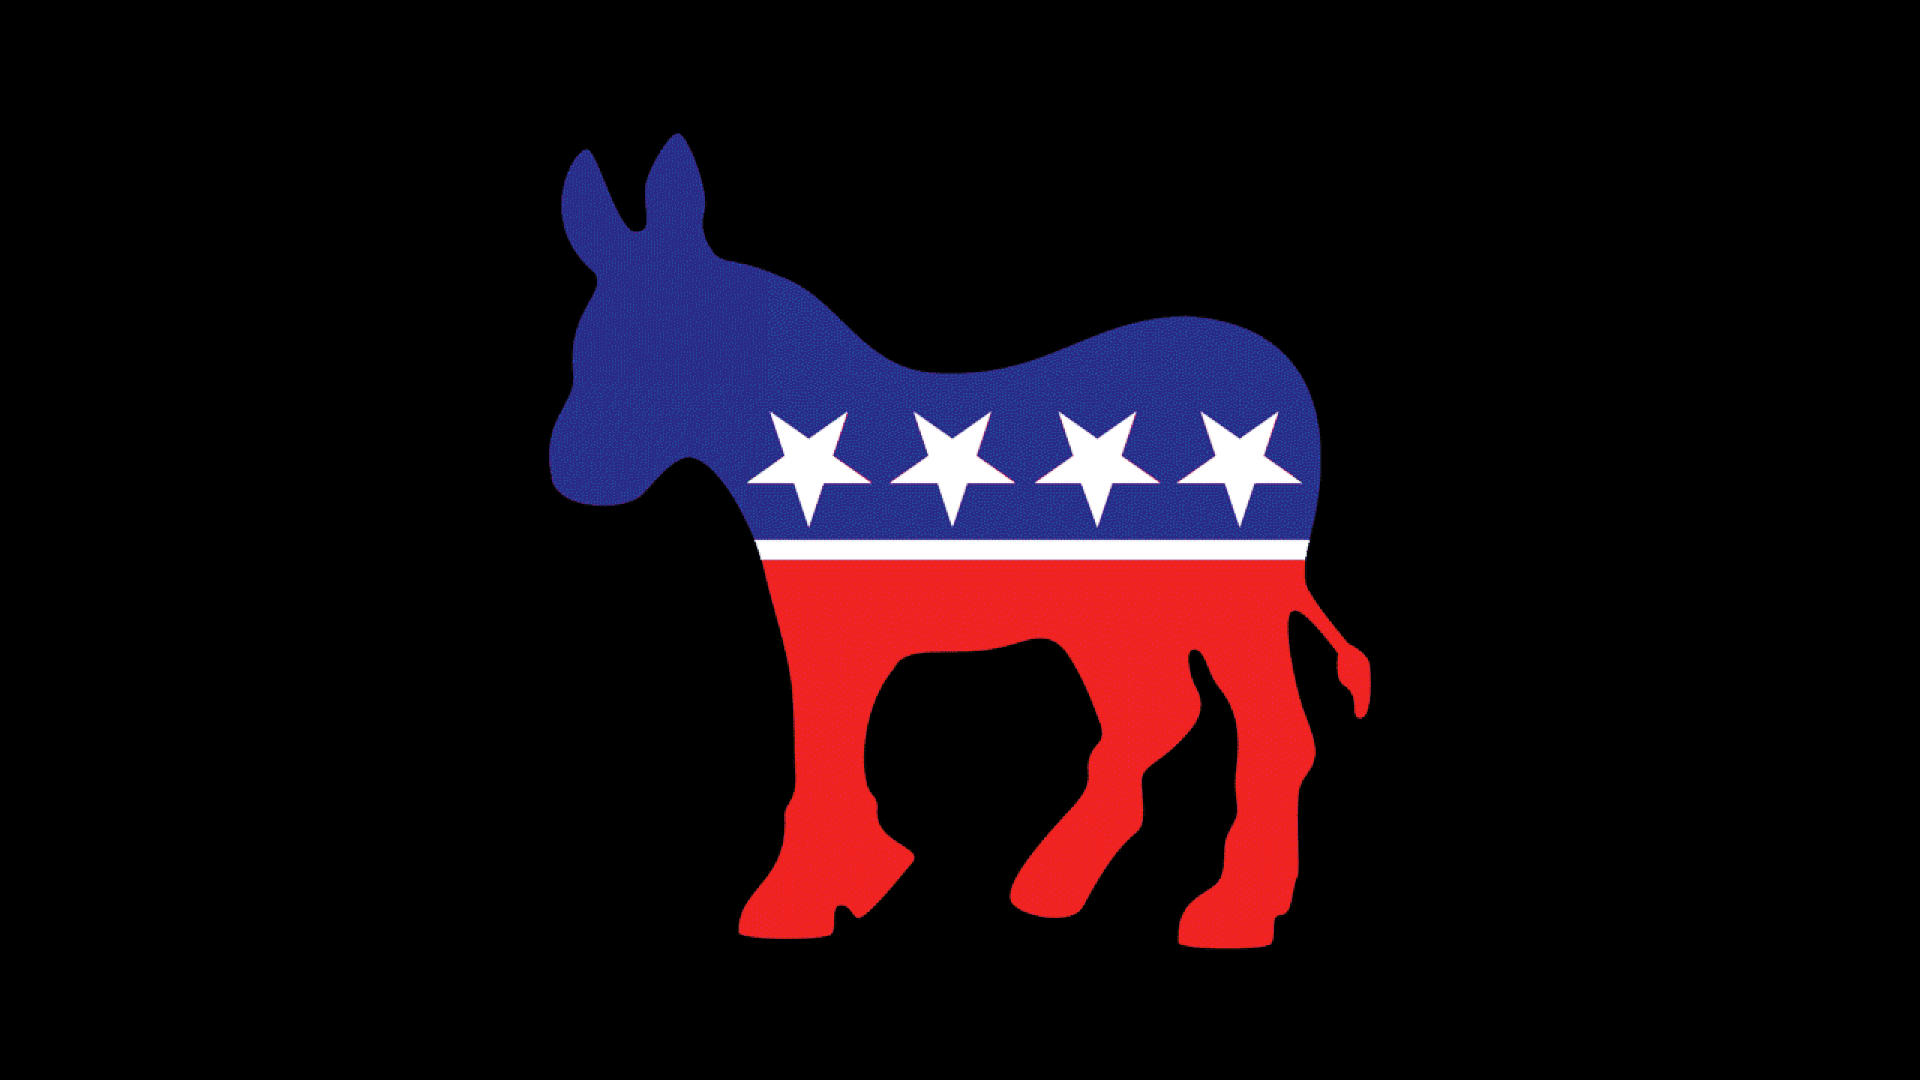 Animated illustration of a Democratic Party donkey changing colors